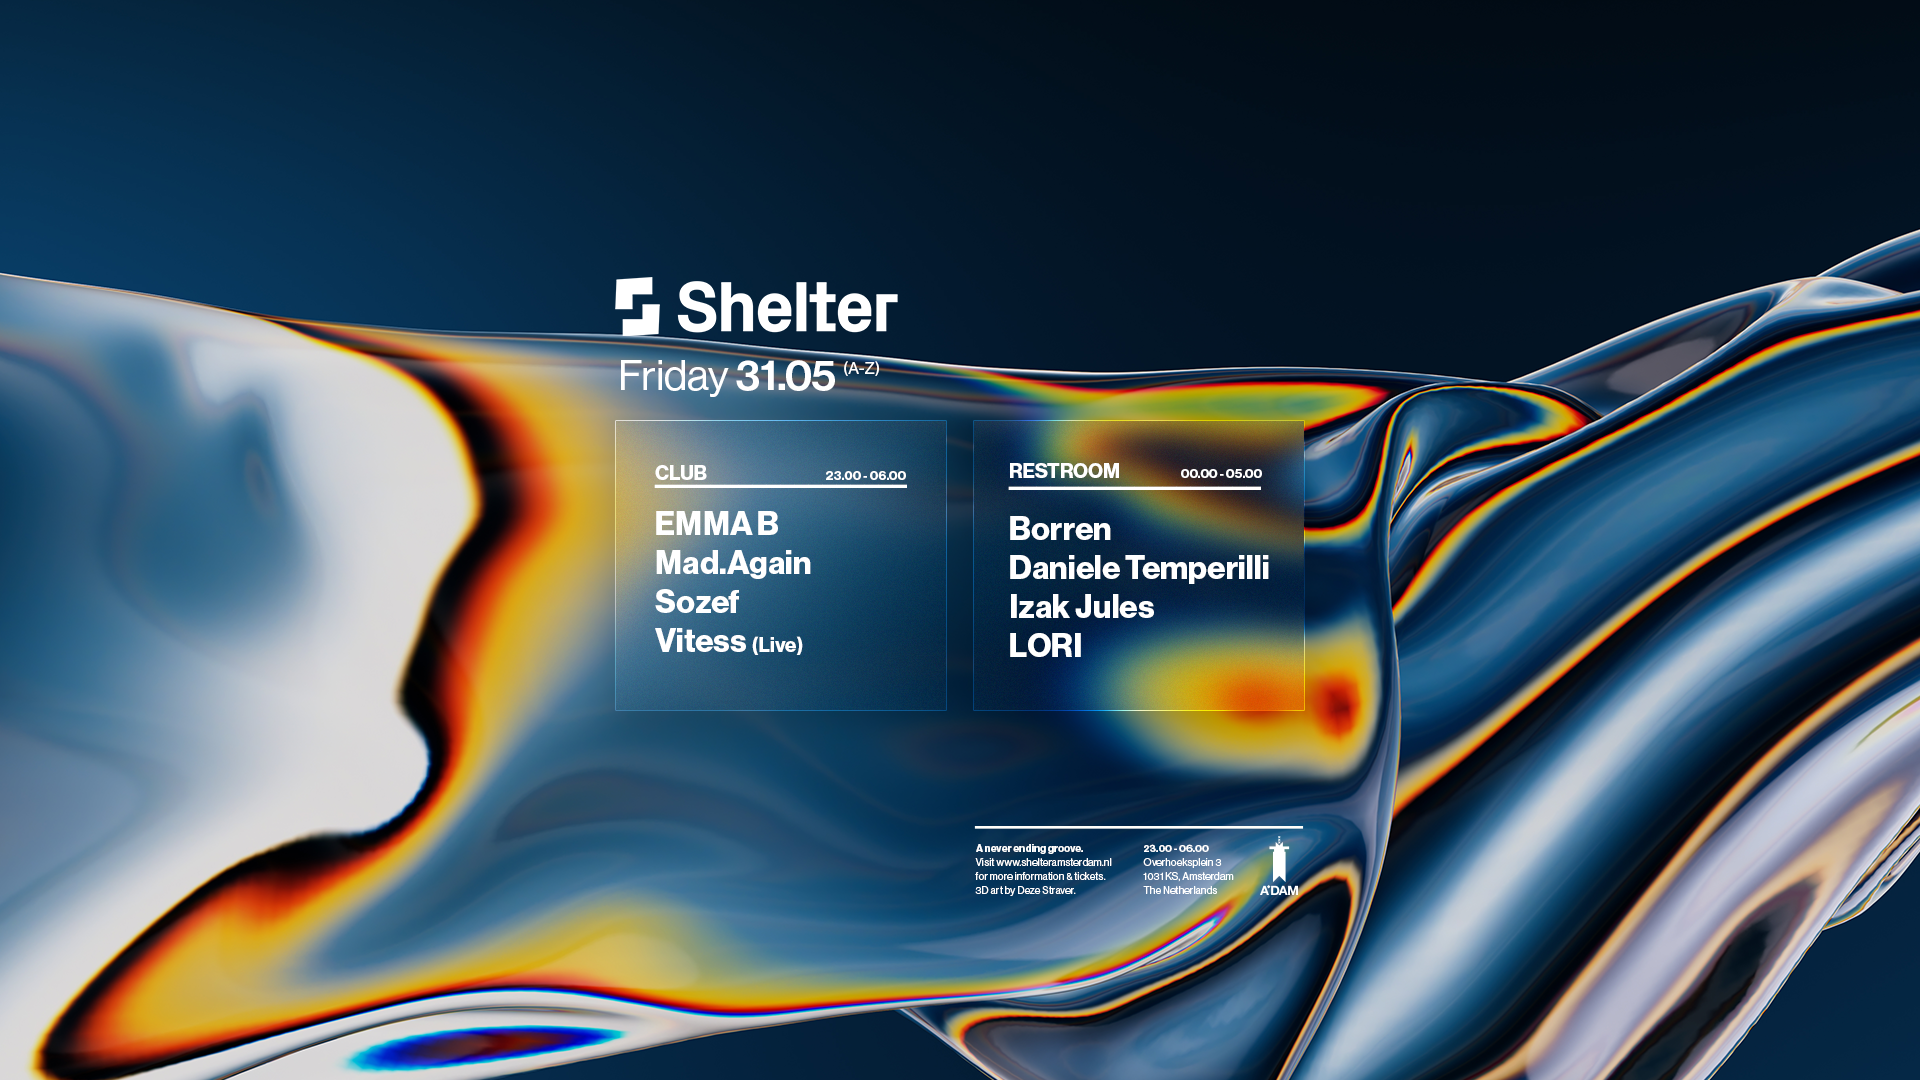 Shelter Club Night - with Mad Again, Vitess, Sozef - フライヤー表